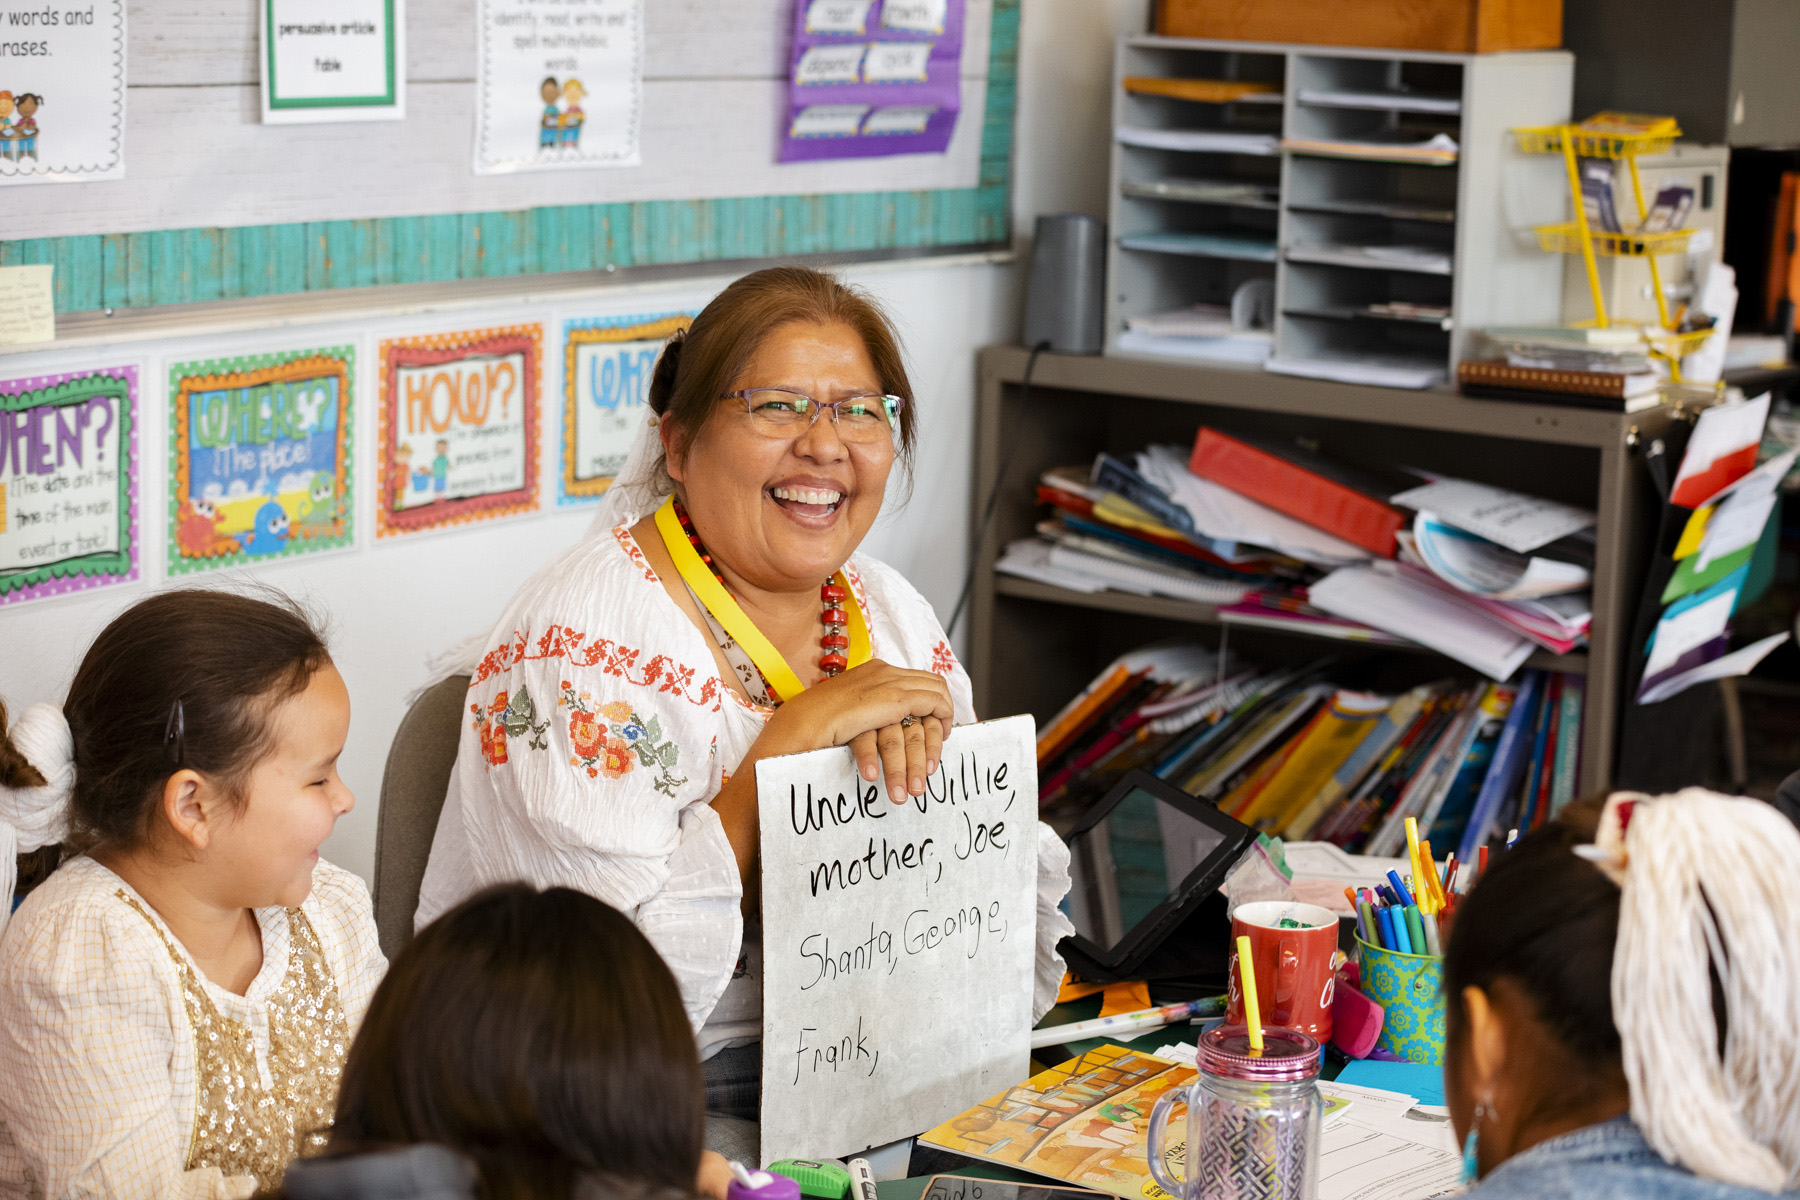 An Indigenous teacher holds up a small whiteboard for her students in a classroom.